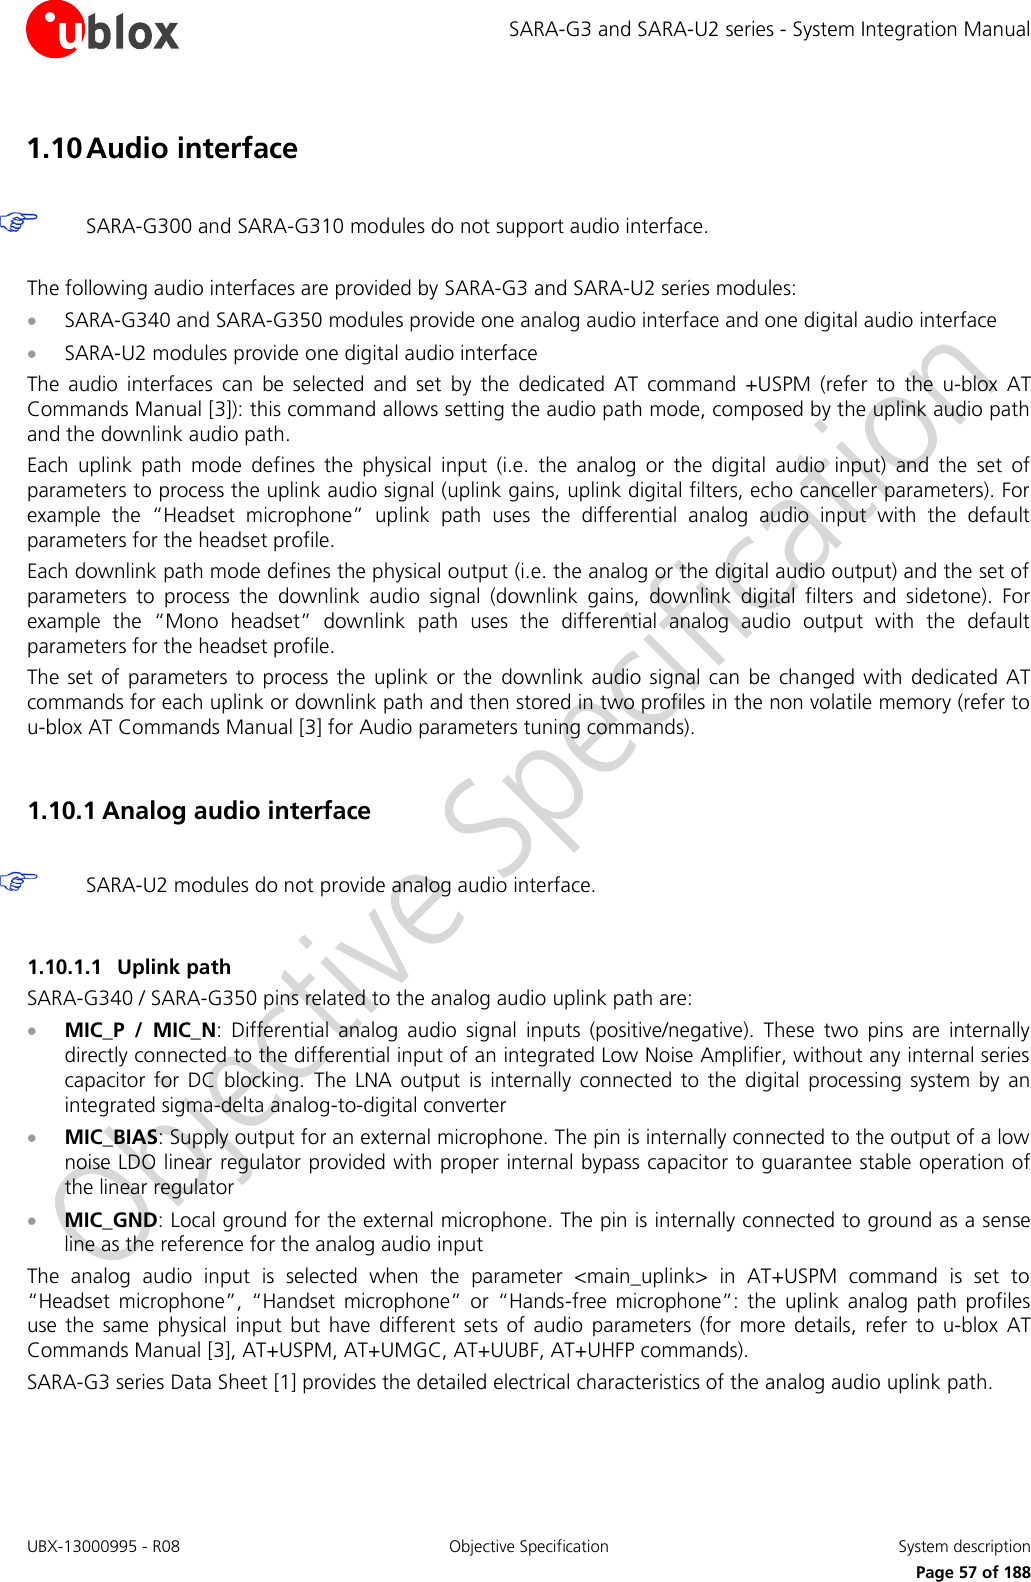 SARA-G3 and SARA-U2 series - System Integration Manual UBX-13000995 - R08  Objective Specification  System description     Page 57 of 188 1.10 Audio interface   SARA-G300 and SARA-G310 modules do not support audio interface.  The following audio interfaces are provided by SARA-G3 and SARA-U2 series modules:  SARA-G340 and SARA-G350 modules provide one analog audio interface and one digital audio interface  SARA-U2 modules provide one digital audio interface The  audio  interfaces  can  be  selected  and  set  by  the  dedicated  AT  command  +USPM  (refer  to  the  u-blox  AT Commands Manual [3]): this command allows setting the audio path mode, composed by the uplink audio path and the downlink audio path. Each  uplink  path  mode  defines  the  physical  input  (i.e.  the  analog  or  the  digital  audio  input)  and  the  set  of parameters to process the uplink audio signal (uplink gains, uplink digital filters, echo canceller parameters). For example  the  “Headset  microphone”  uplink  path  uses  the  differential  analog  audio  input  with  the  default parameters for the headset profile. Each downlink path mode defines the physical output (i.e. the analog or the digital audio output) and the set of parameters  to  process  the  downlink  audio  signal  (downlink  gains,  downlink  digital  filters  and  sidetone).  For example  the  “Mono  headset”  downlink  path  uses  the  differential  analog  audio  output  with  the  default parameters for the headset profile. The  set of  parameters  to  process the  uplink  or  the downlink audio signal can  be  changed with  dedicated AT commands for each uplink or downlink path and then stored in two profiles in the non volatile memory (refer to u-blox AT Commands Manual [3] for Audio parameters tuning commands).  1.10.1 Analog audio interface   SARA-U2 modules do not provide analog audio interface.  1.10.1.1 Uplink path SARA-G340 / SARA-G350 pins related to the analog audio uplink path are:  MIC_P  /  MIC_N:  Differential  analog  audio  signal  inputs  (positive/negative).  These  two  pins  are  internally directly connected to the differential input of an integrated Low Noise Amplifier, without any internal series capacitor  for  DC  blocking.  The  LNA  output  is  internally  connected  to  the  digital  processing  system  by  an integrated sigma-delta analog-to-digital converter  MIC_BIAS: Supply output for an external microphone. The pin is internally connected to the output of a low noise LDO linear regulator provided with proper internal bypass capacitor to guarantee stable operation of the linear regulator  MIC_GND: Local ground for the external microphone. The pin is internally connected to ground as a sense line as the reference for the analog audio input The  analog  audio  input  is  selected  when  the  parameter  &lt;main_uplink&gt;  in  AT+USPM  command  is  set  to “Headset  microphone”,  “Handset  microphone”  or  “Hands-free  microphone”:  the  uplink  analog  path  profiles use  the  same  physical  input  but  have  different  sets  of  audio  parameters  (for  more  details,  refer  to  u-blox  AT Commands Manual [3], AT+USPM, AT+UMGC, AT+UUBF, AT+UHFP commands). SARA-G3 series Data Sheet [1] provides the detailed electrical characteristics of the analog audio uplink path.  